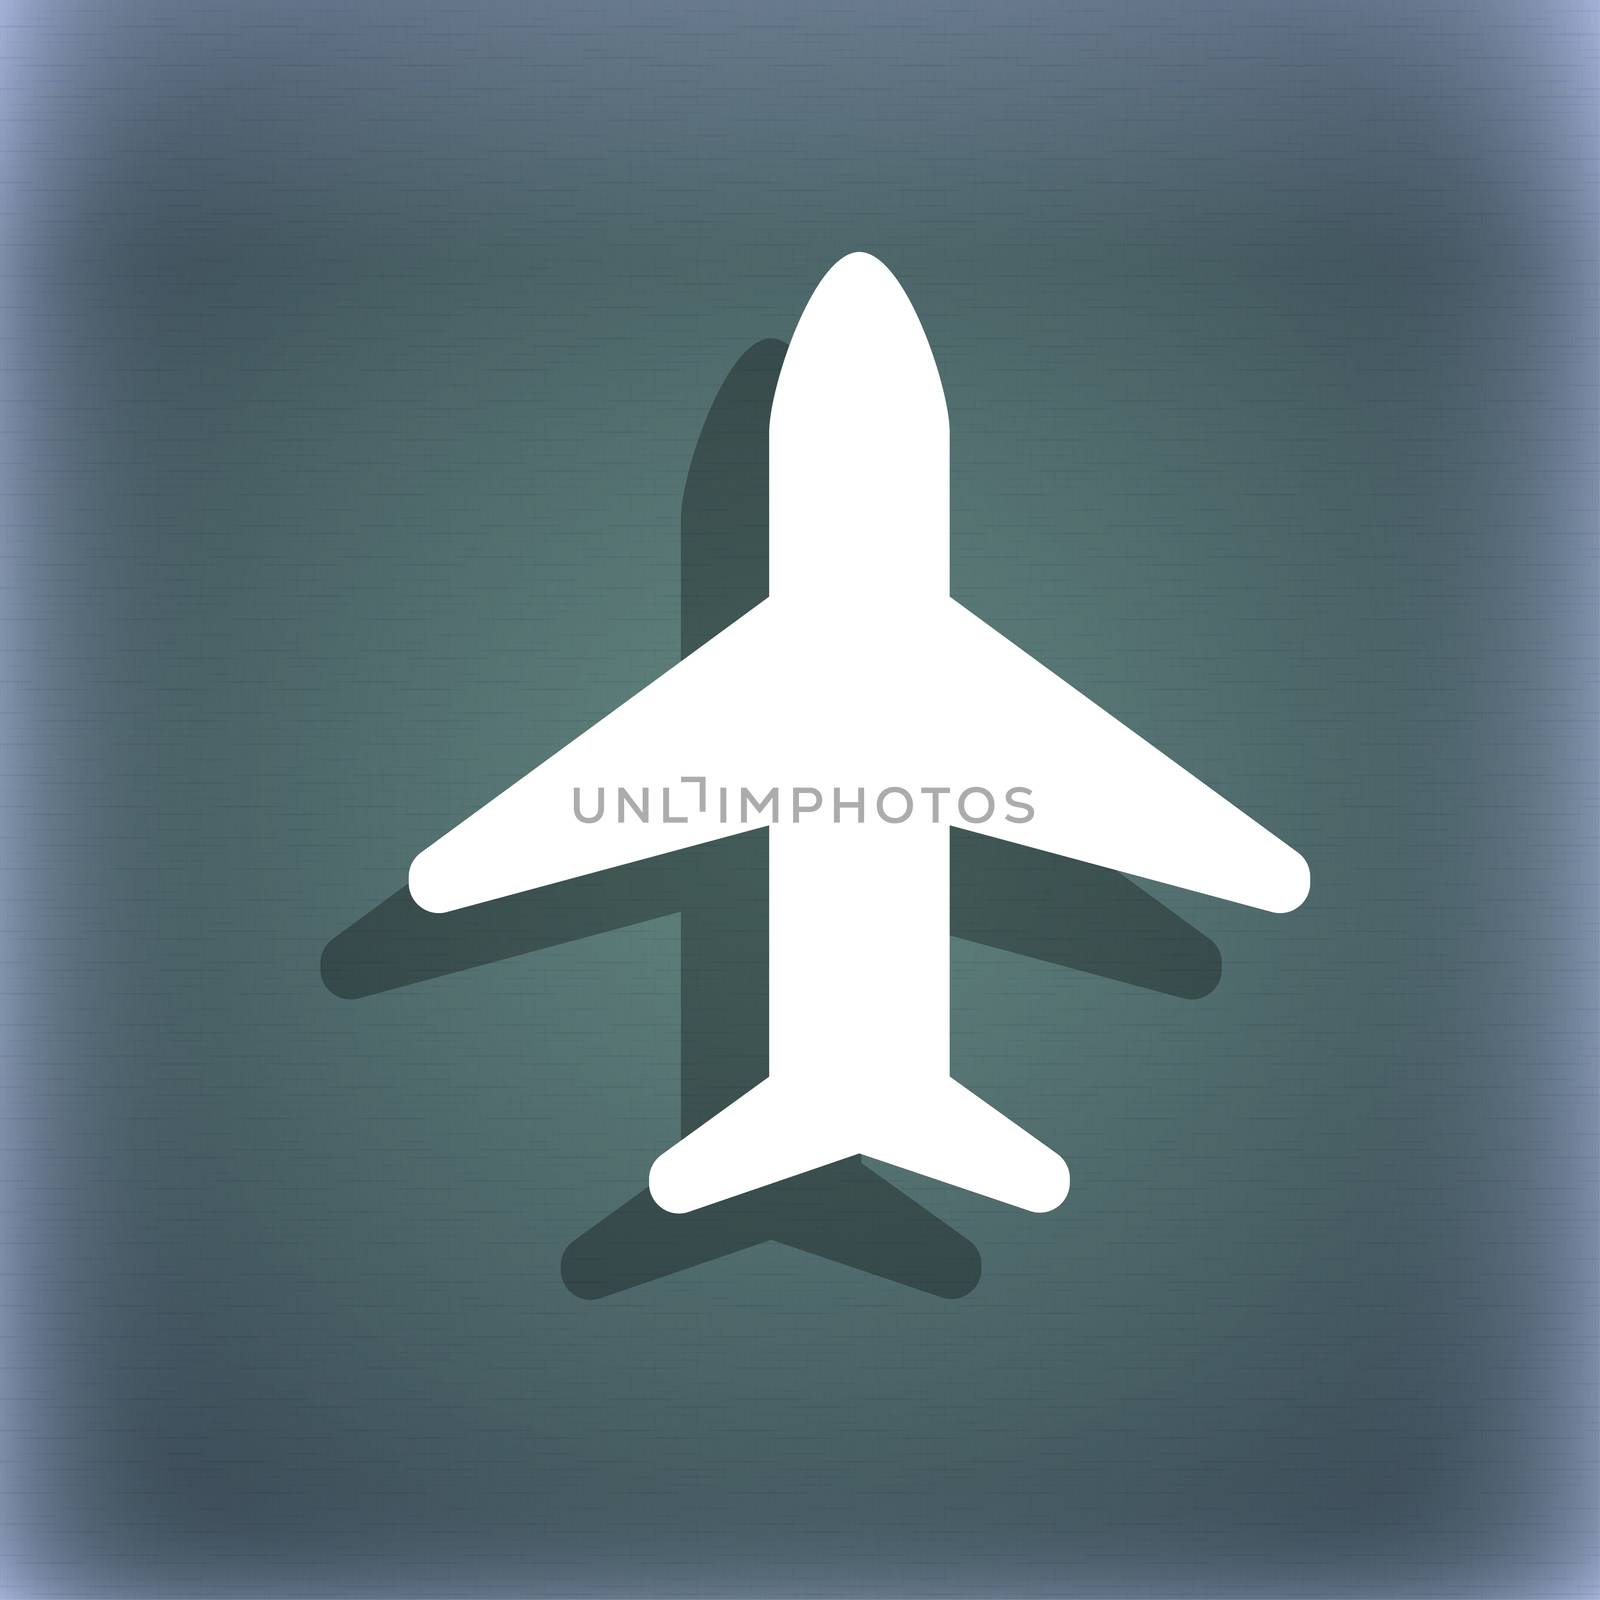 Airplane, Plane, Travel, Flight icon symbol on the blue-green abstract background with shadow and space for your text. illustration